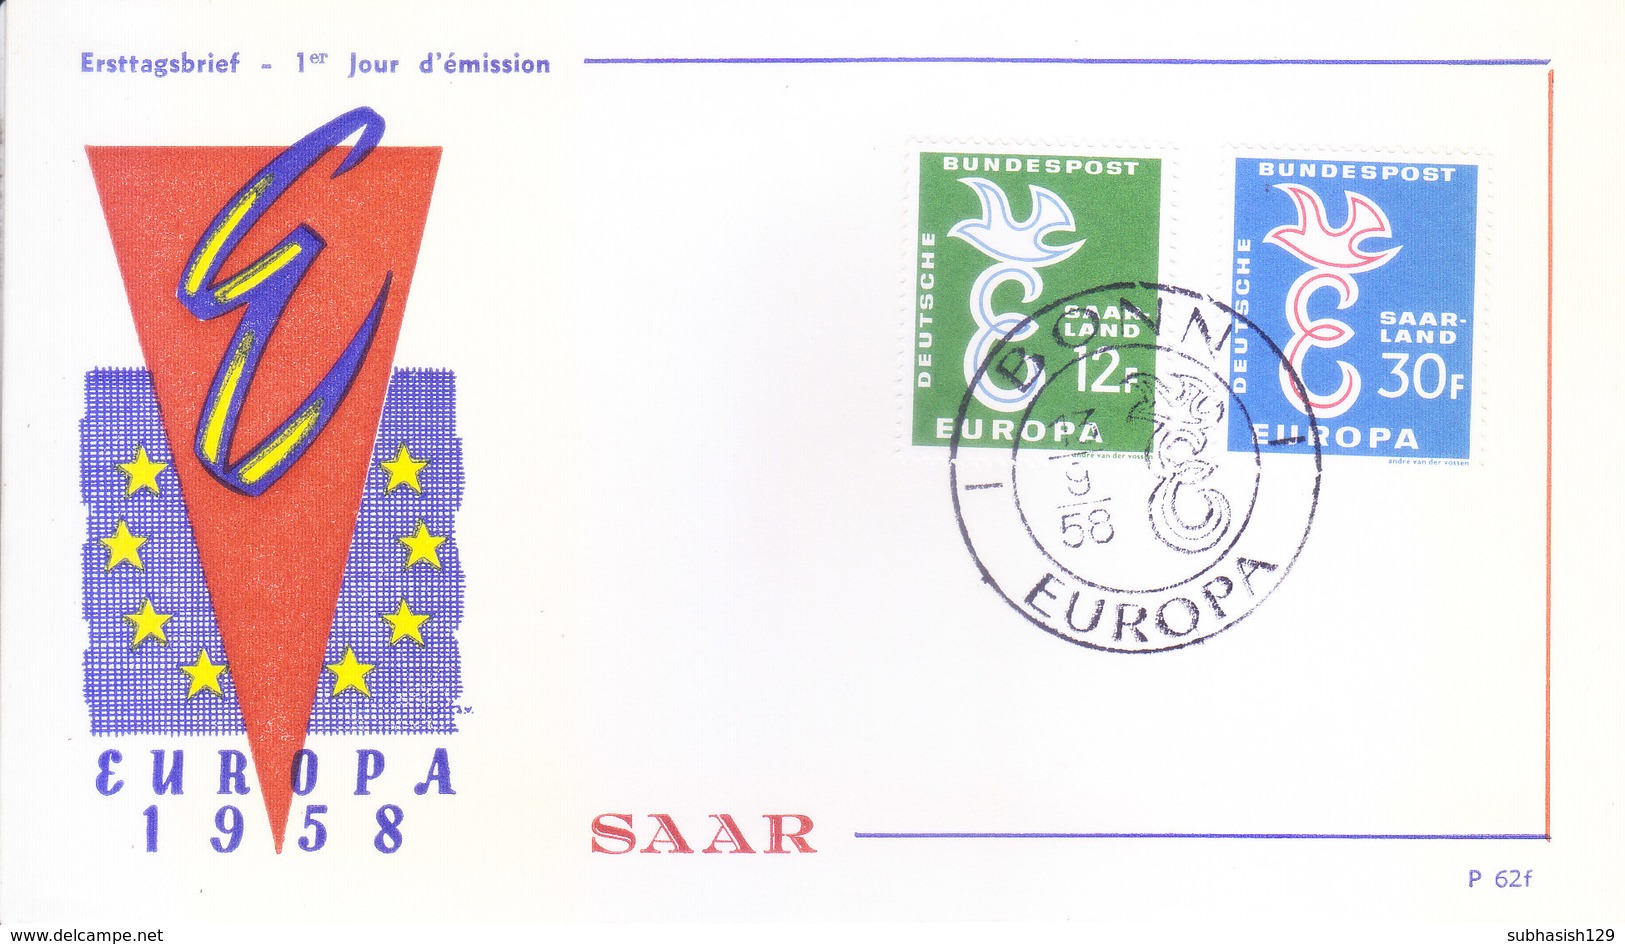 1958 SET OF 7 FIRST DAY COVERS ON EUROPA ISSUED FROM SEVEN DIFFERENT EUROPEAN COUNTRIES - COVER NO. P 62a TO P 62g